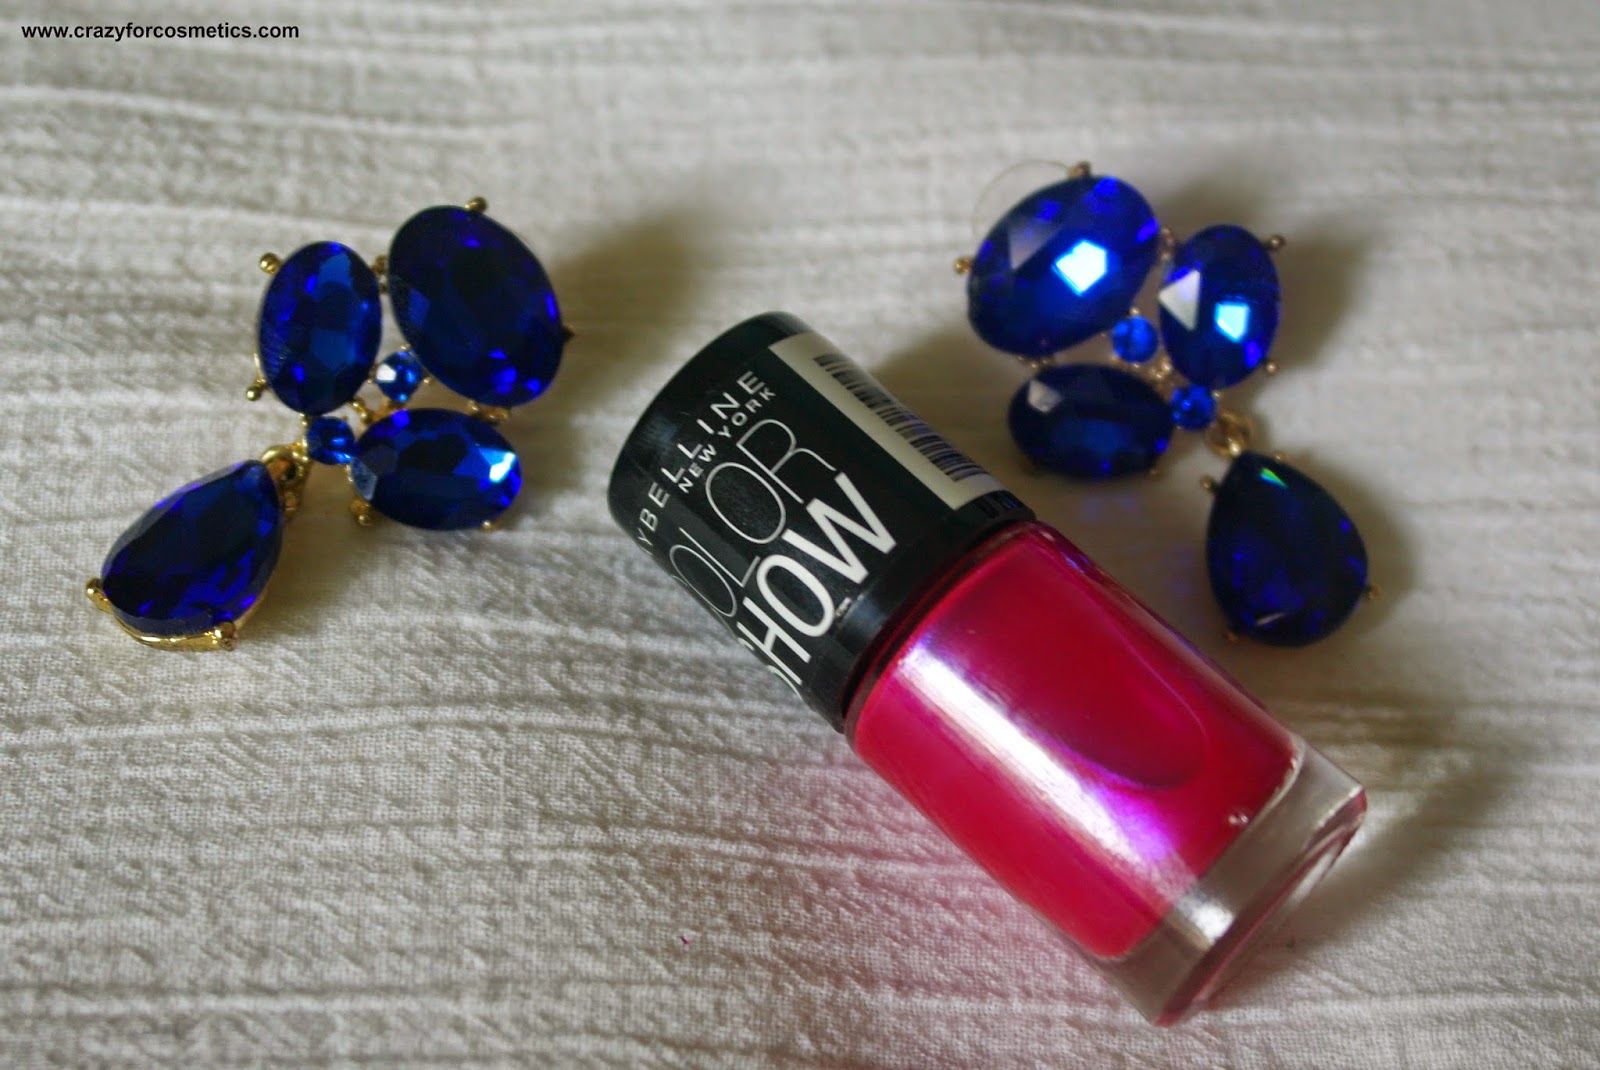 maybelline color show kiss me pink review